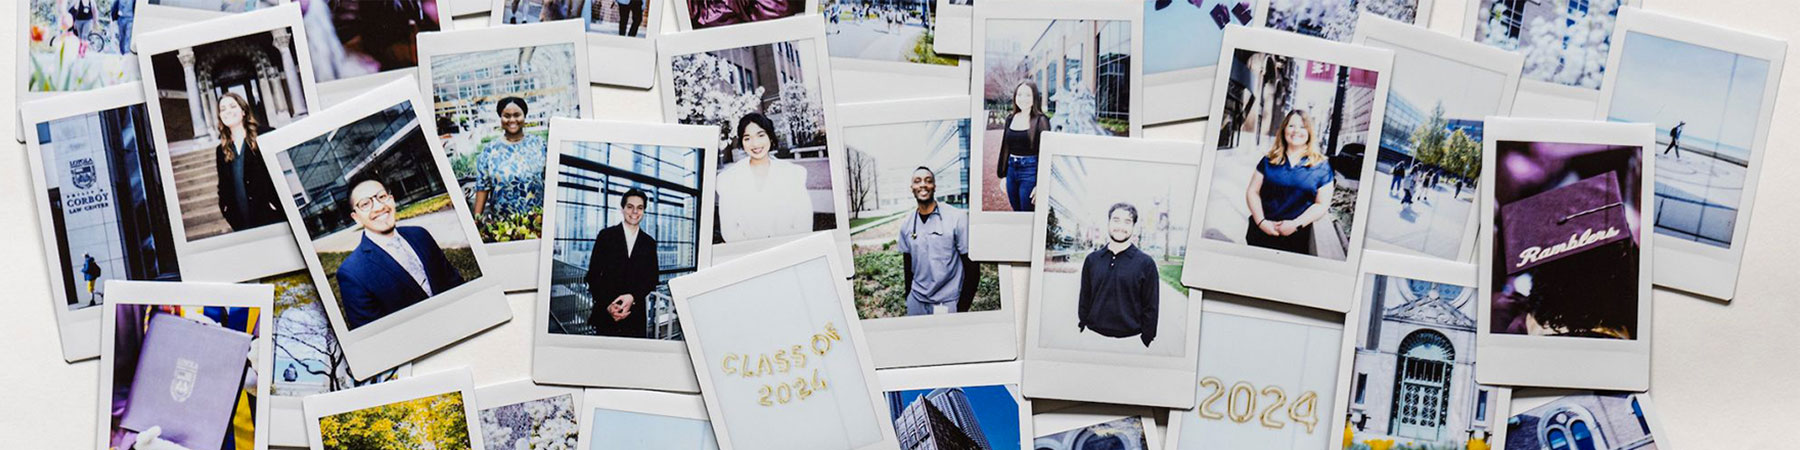 A group of various polaroid images of 2024 graduating students and other commencement related subjects displayed together on a wall.